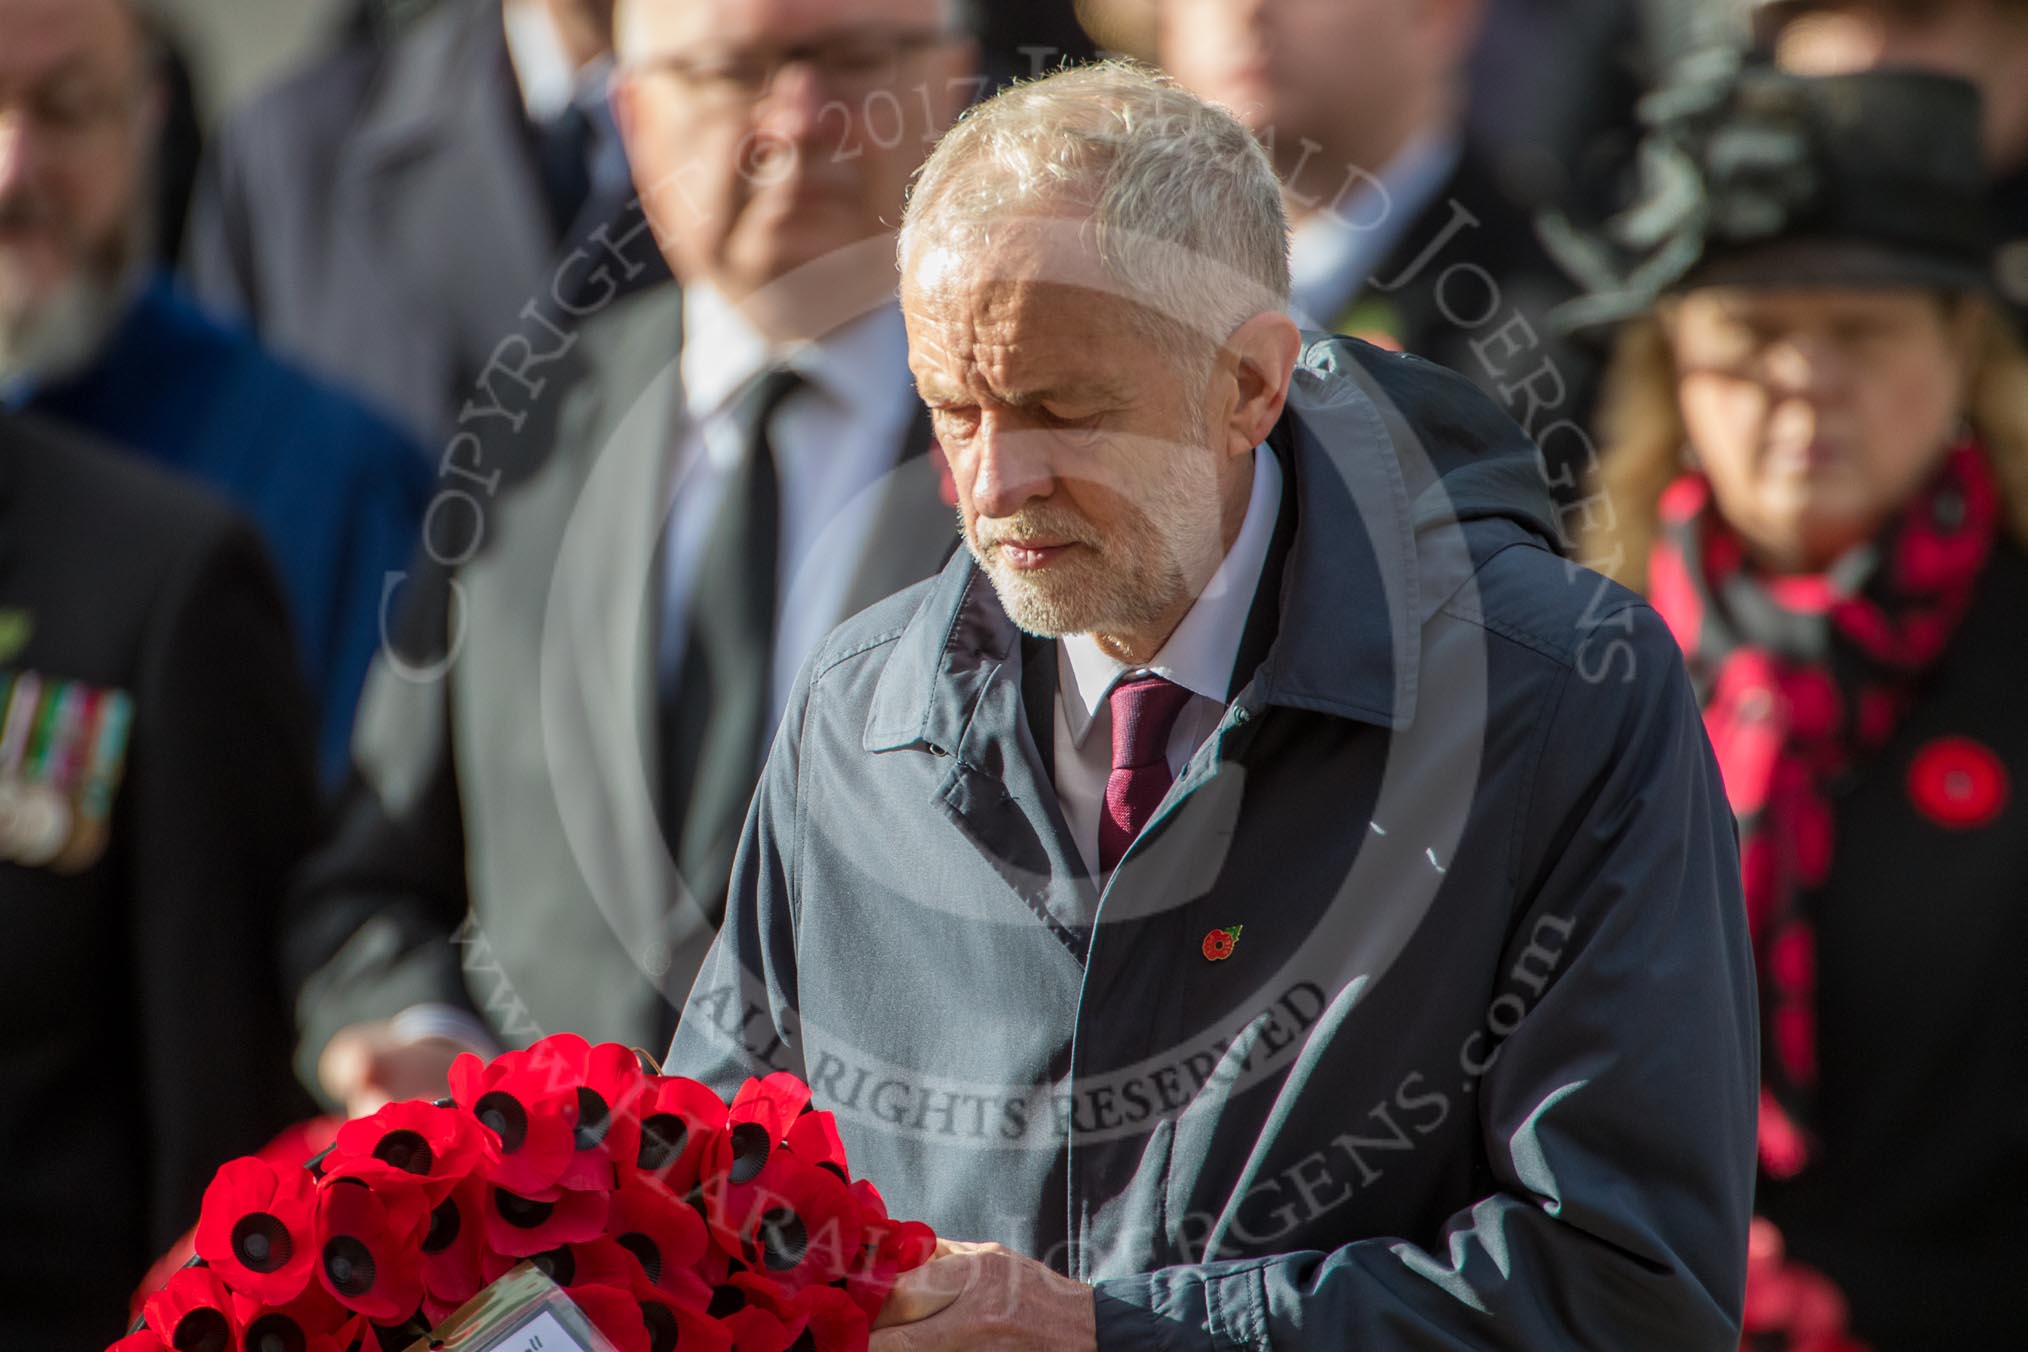 The Rt Hon Jeremy Corbyn MP, (Leader of the Labour Party and Leader of the Opposition)  during the Remembrance Sunday Cenotaph Ceremony 2018 at Horse Guards Parade, Westminster, London, 11 November 2018, 11:08.